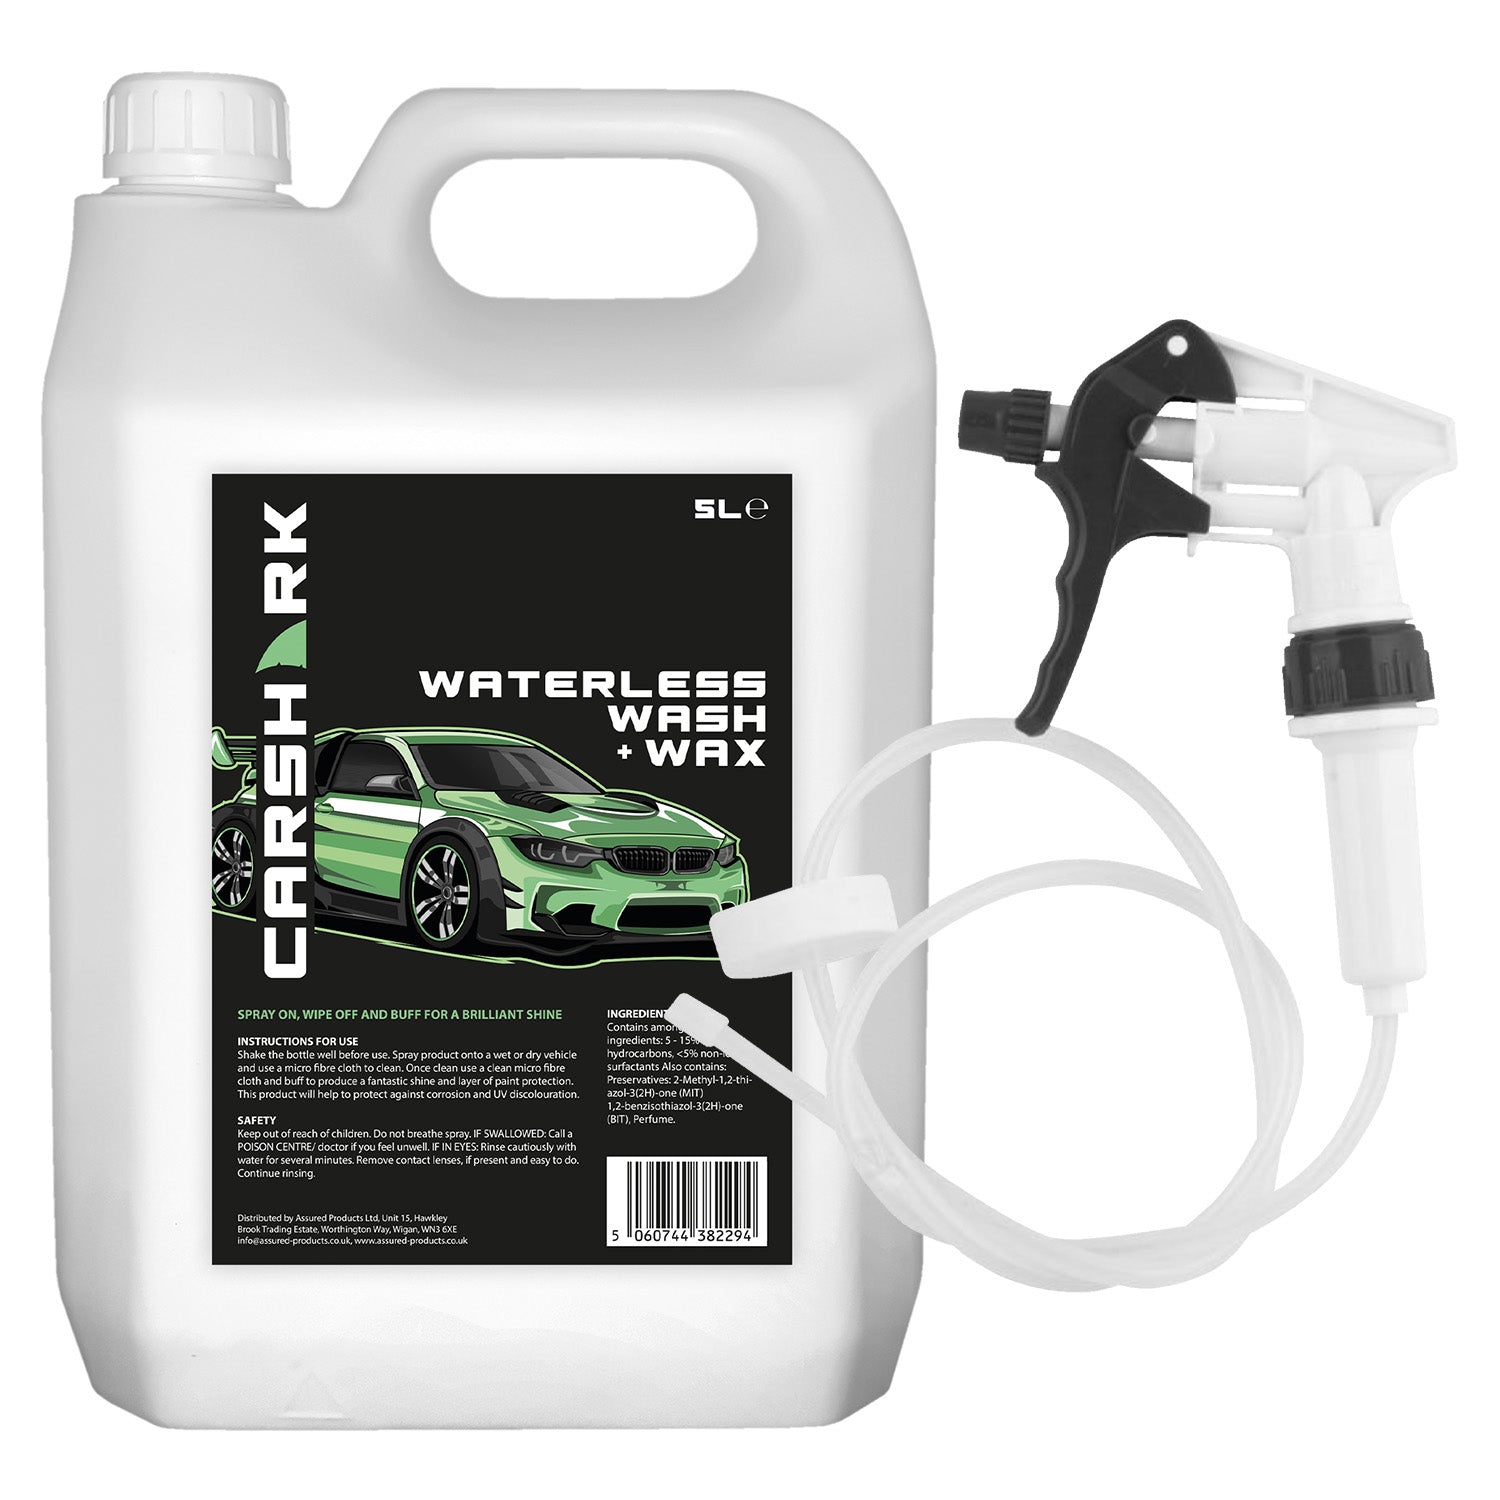 CARSHARK Waterless Wash & Wax 5L (with Long Hose Trigger)